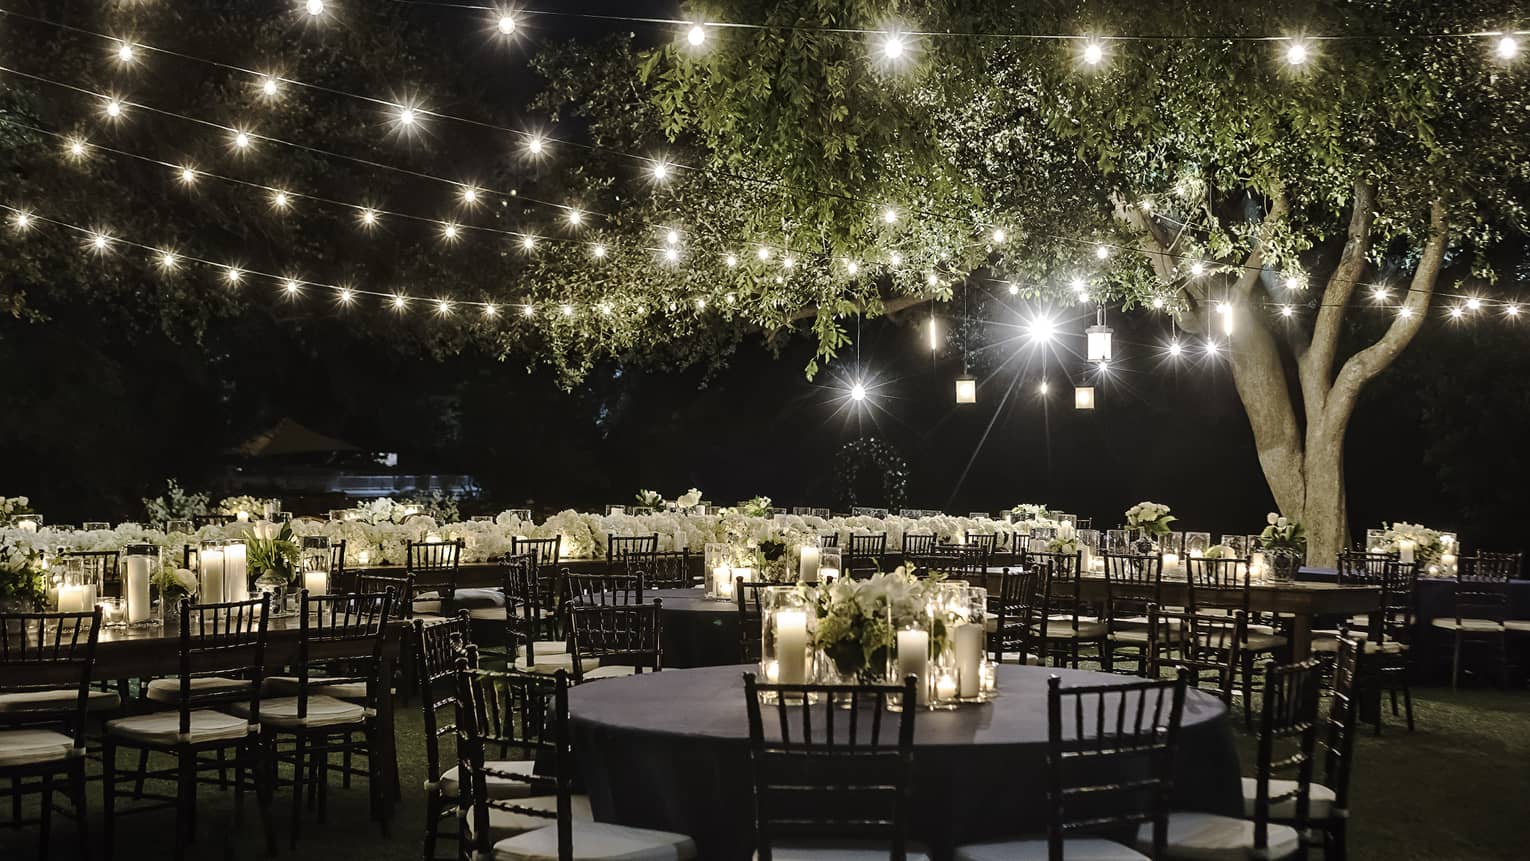 Lights strung across patio to large tree over round banquet tables with candles at night